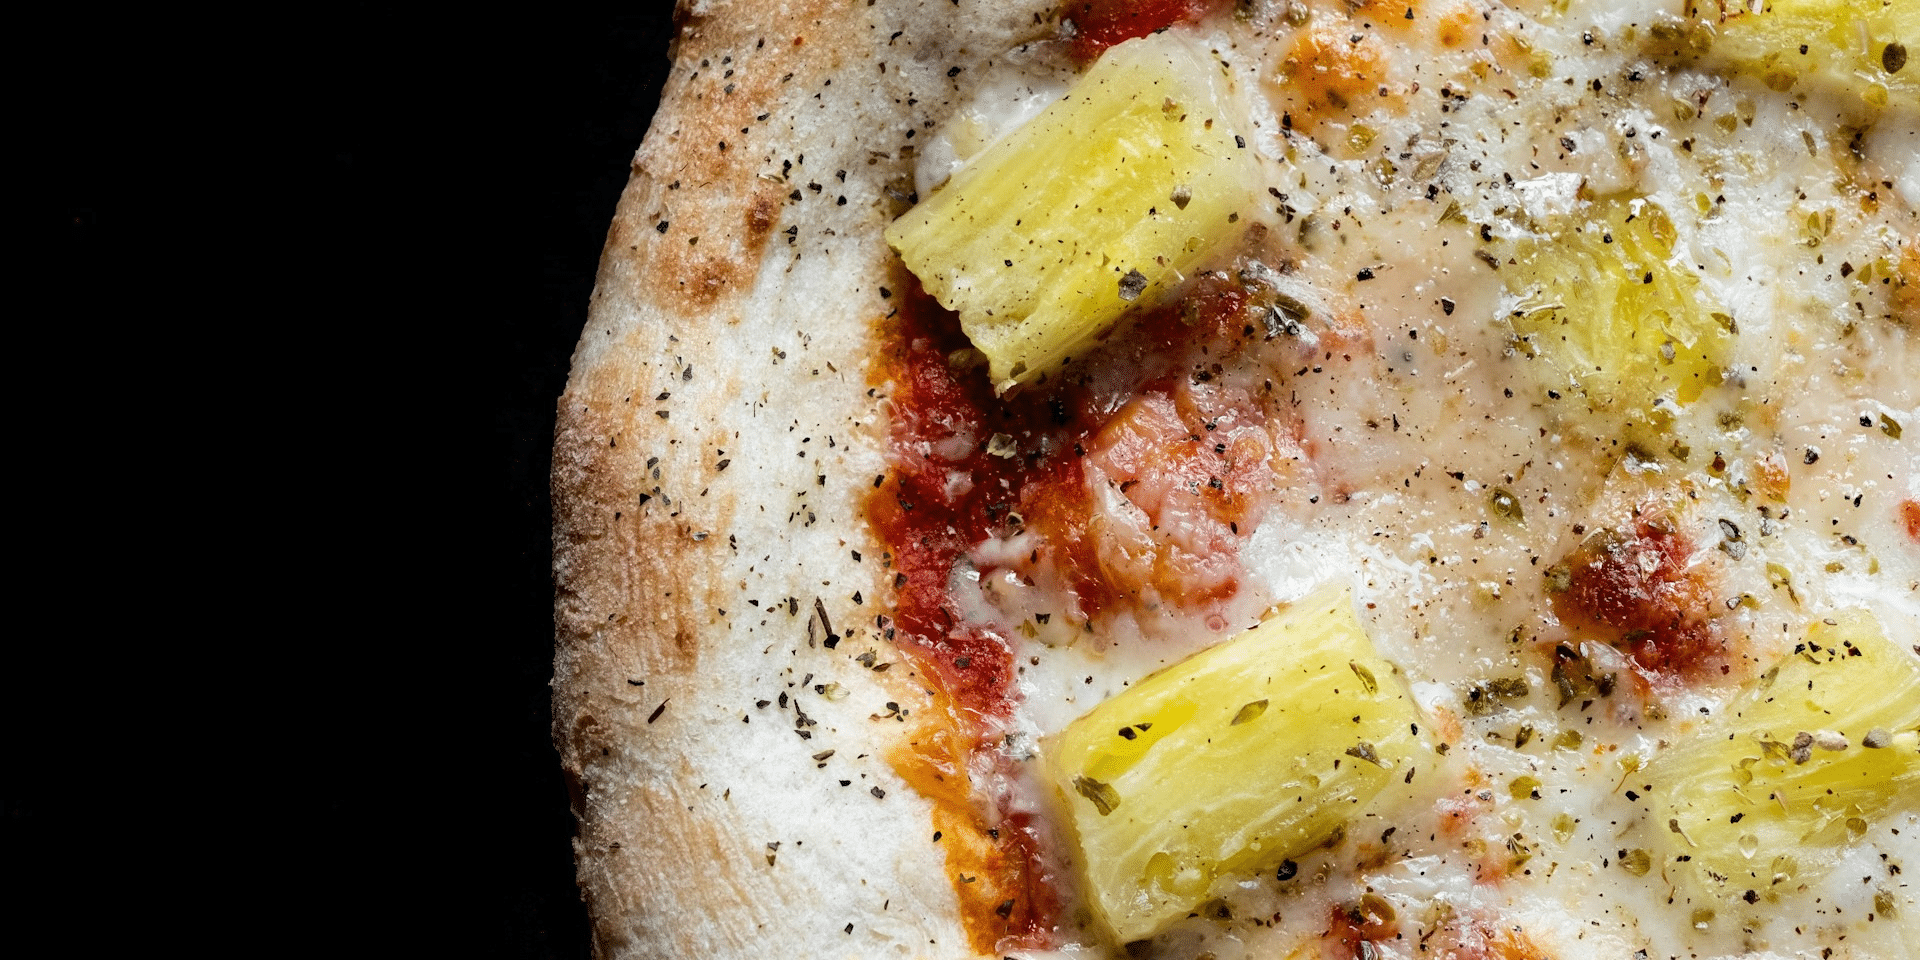 Why Adding Pineapple to Pizza Is Acceptable